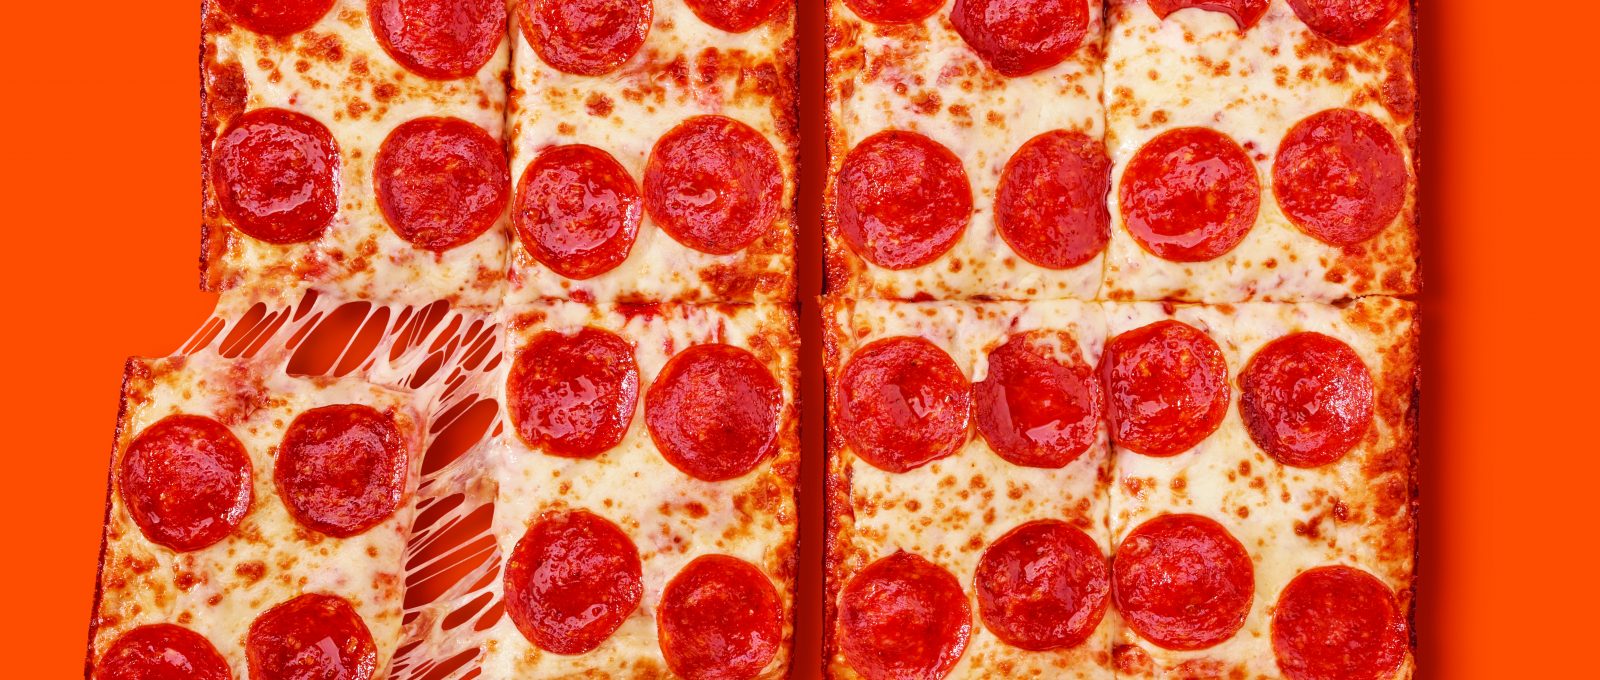 Detroit-Style Pizza Wars Heat Up As Little Caesars Challenges Competition -  Ilitch Companies News Hub